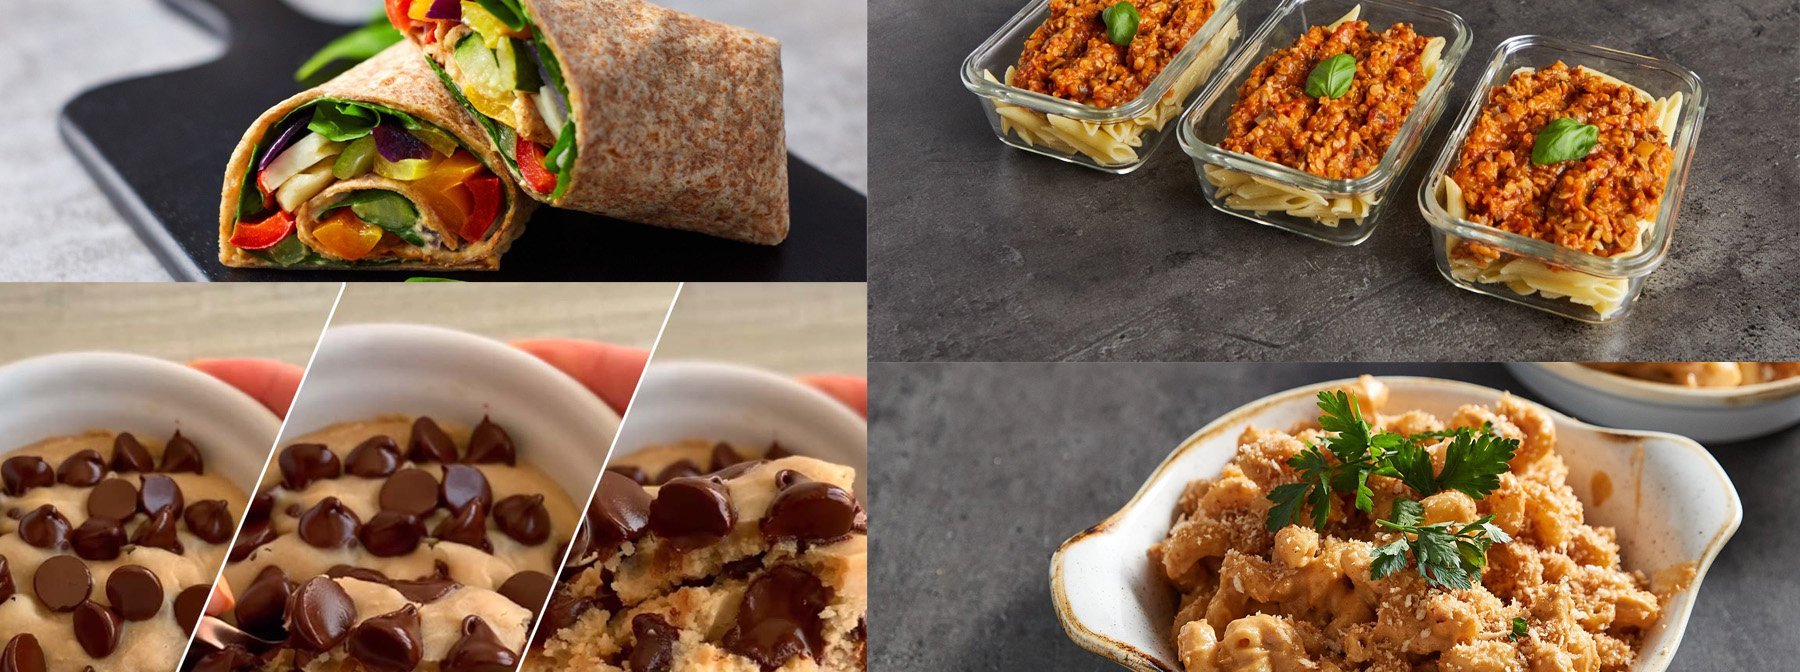 9 High Protein Vegan Meal Preps To Meet Your Goals